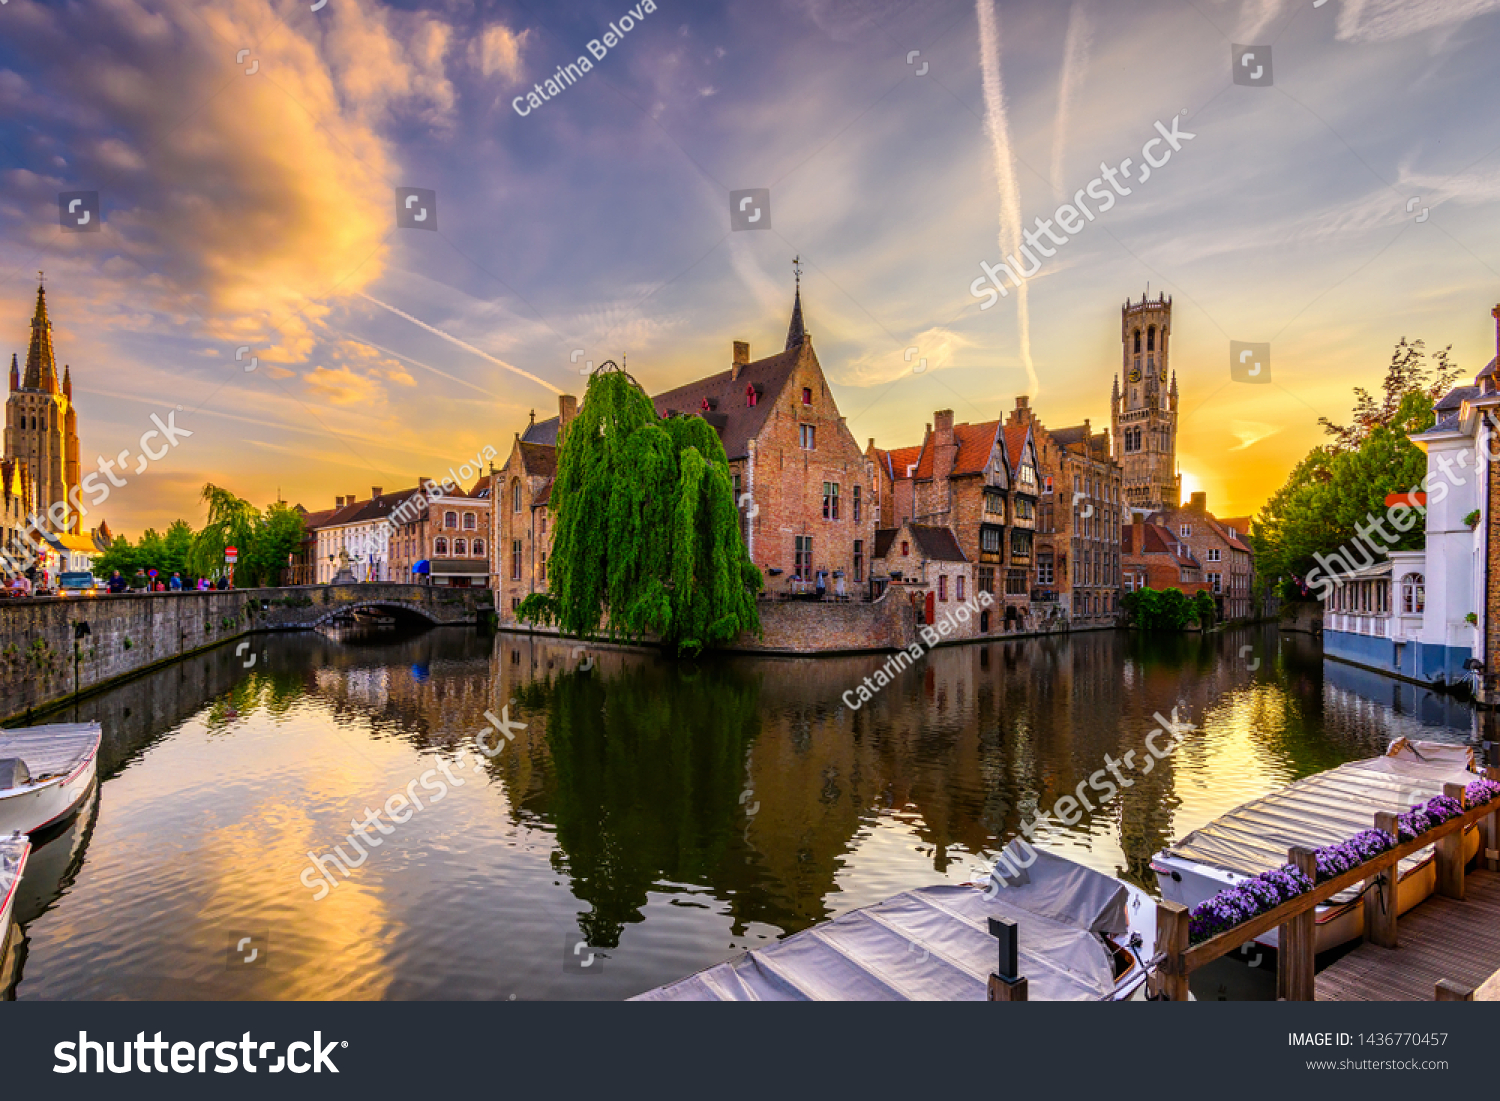 Classic view of the historic city center of Bruges (Brugge), West Flanders province, Belgium. Sunset cityscape of Bruges. Canals of Brugge #1436770457